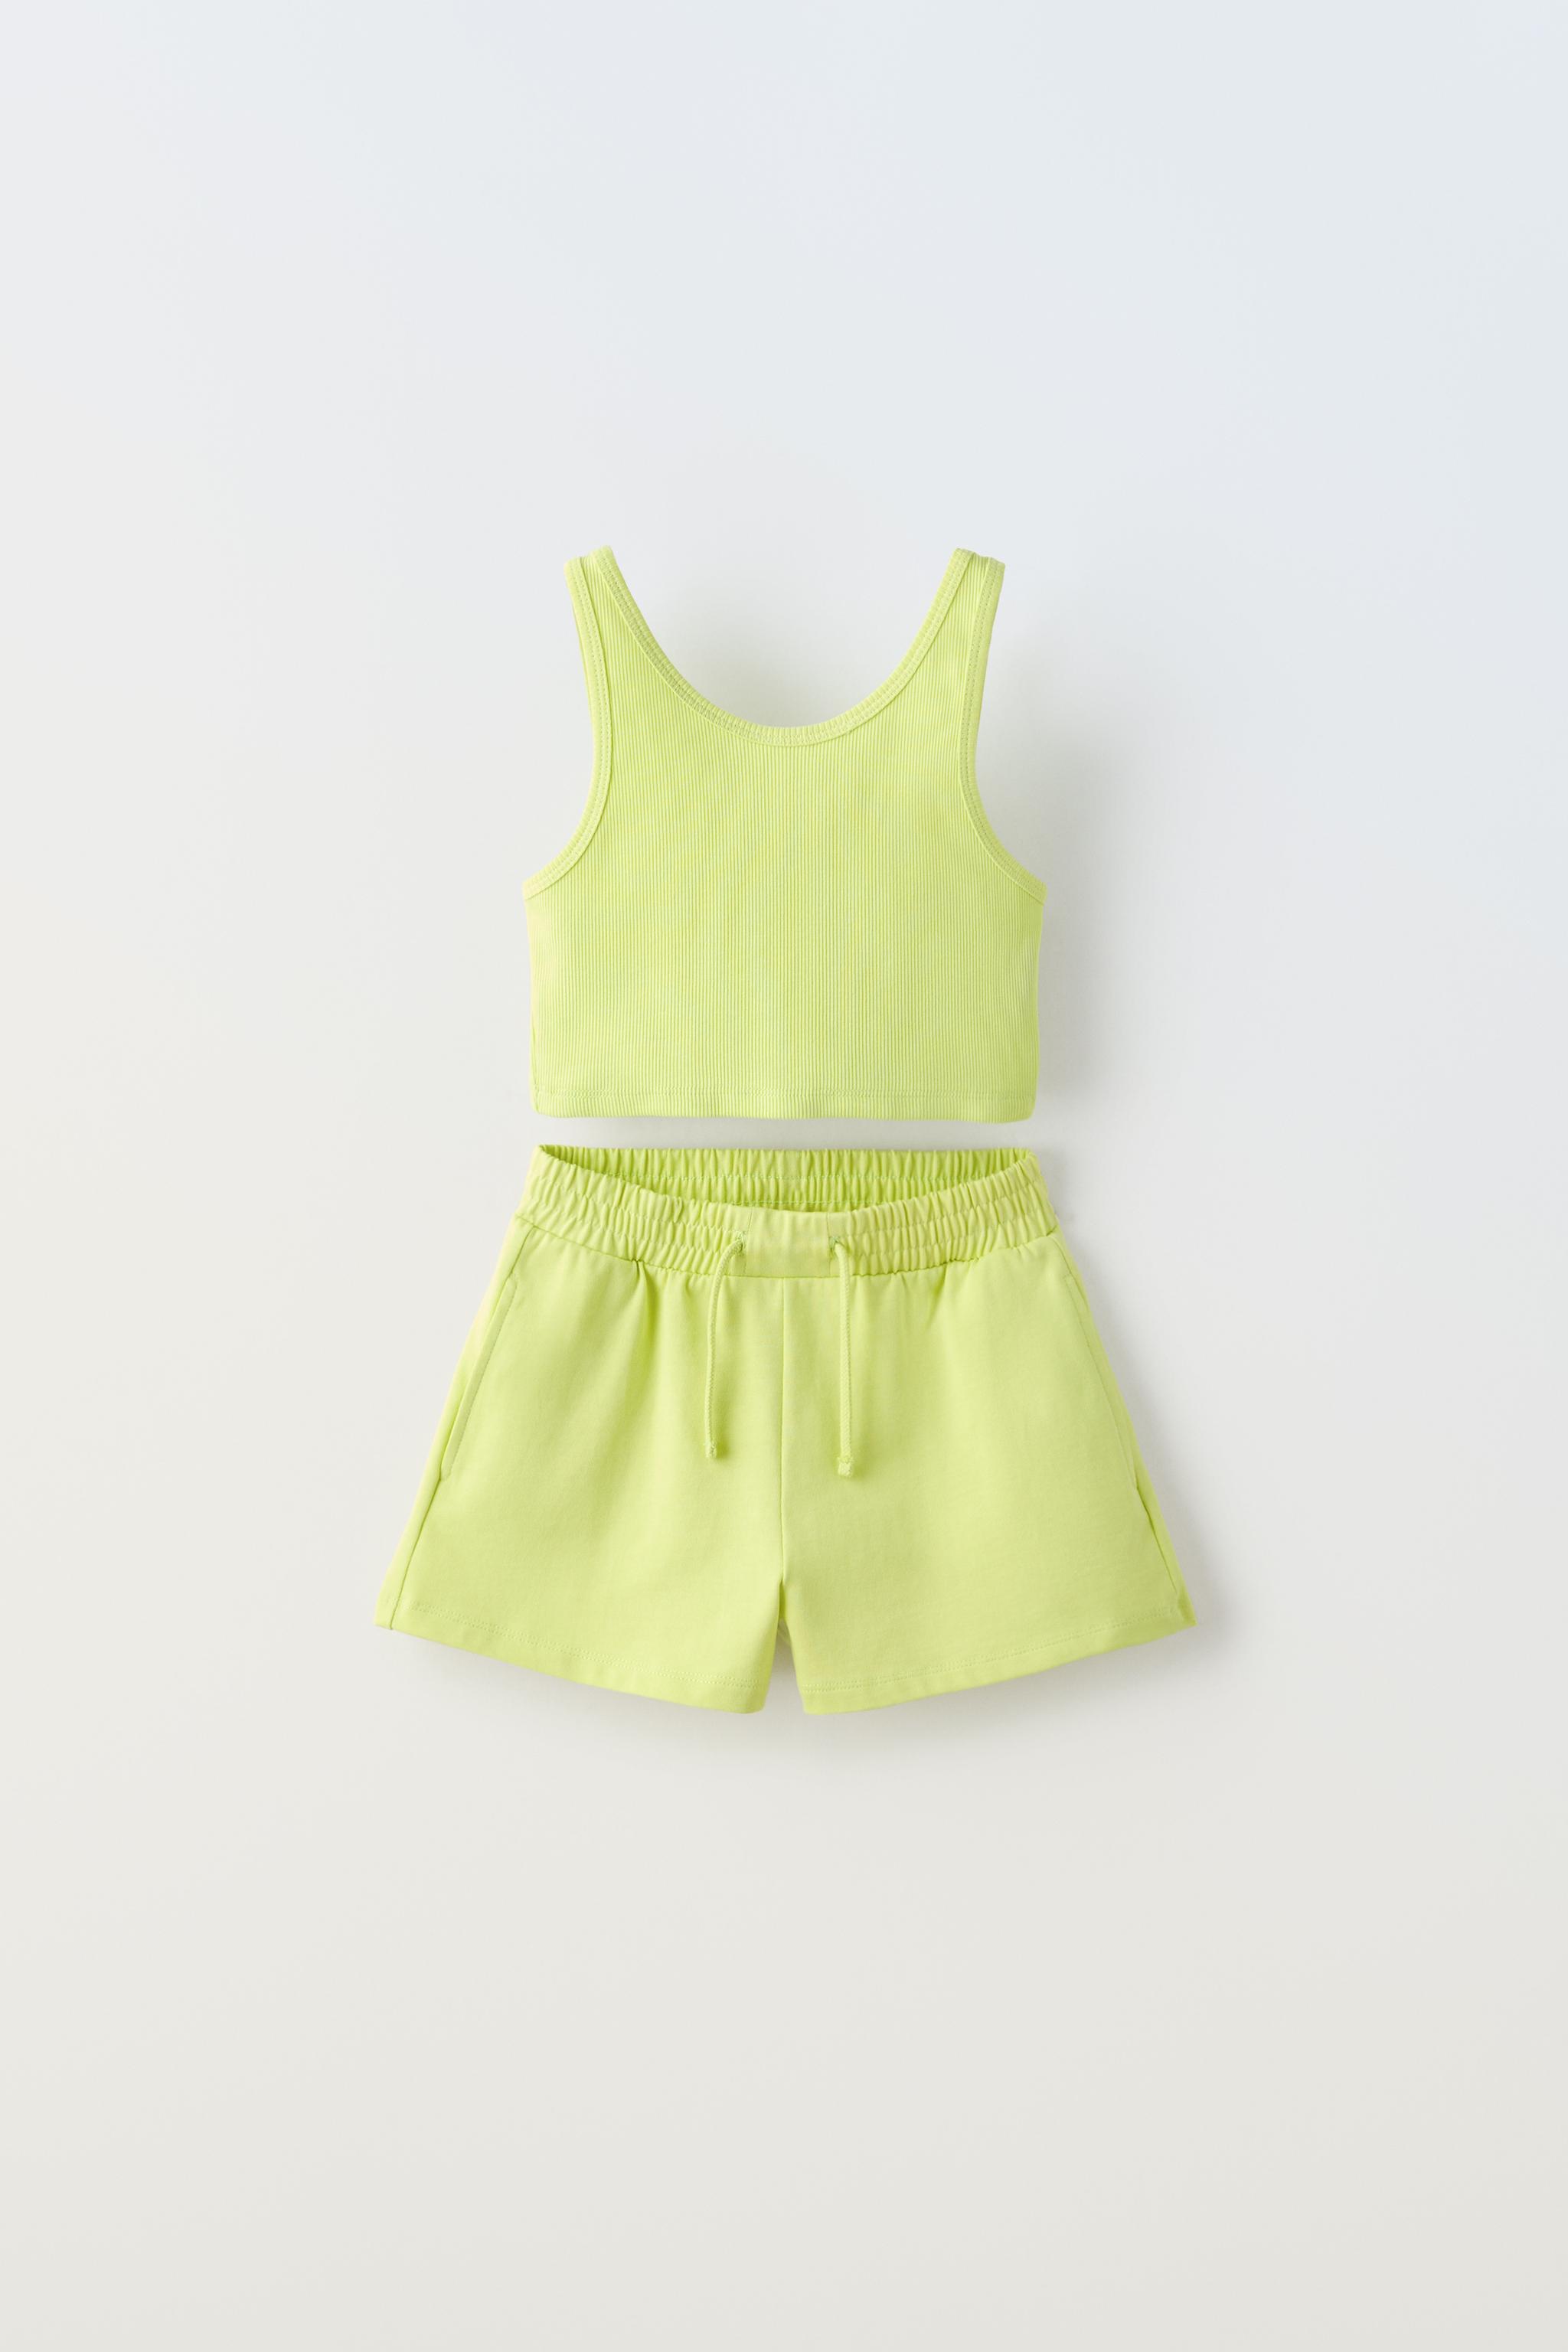 TOP AND SHORTS SET - Lime green | ZARA United States